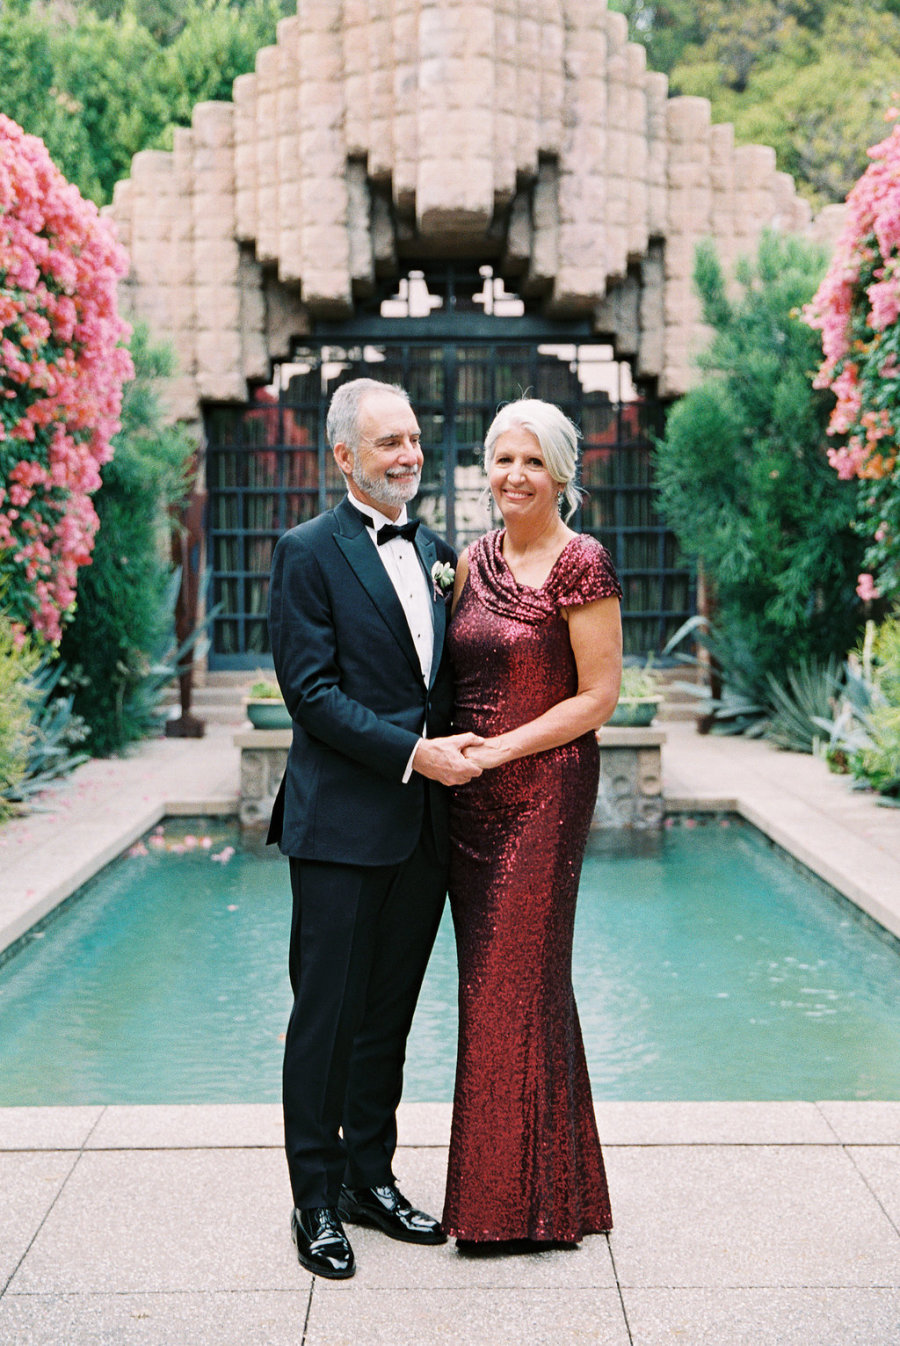 The groom's parents look really glam and chic   look at that red sequin dress